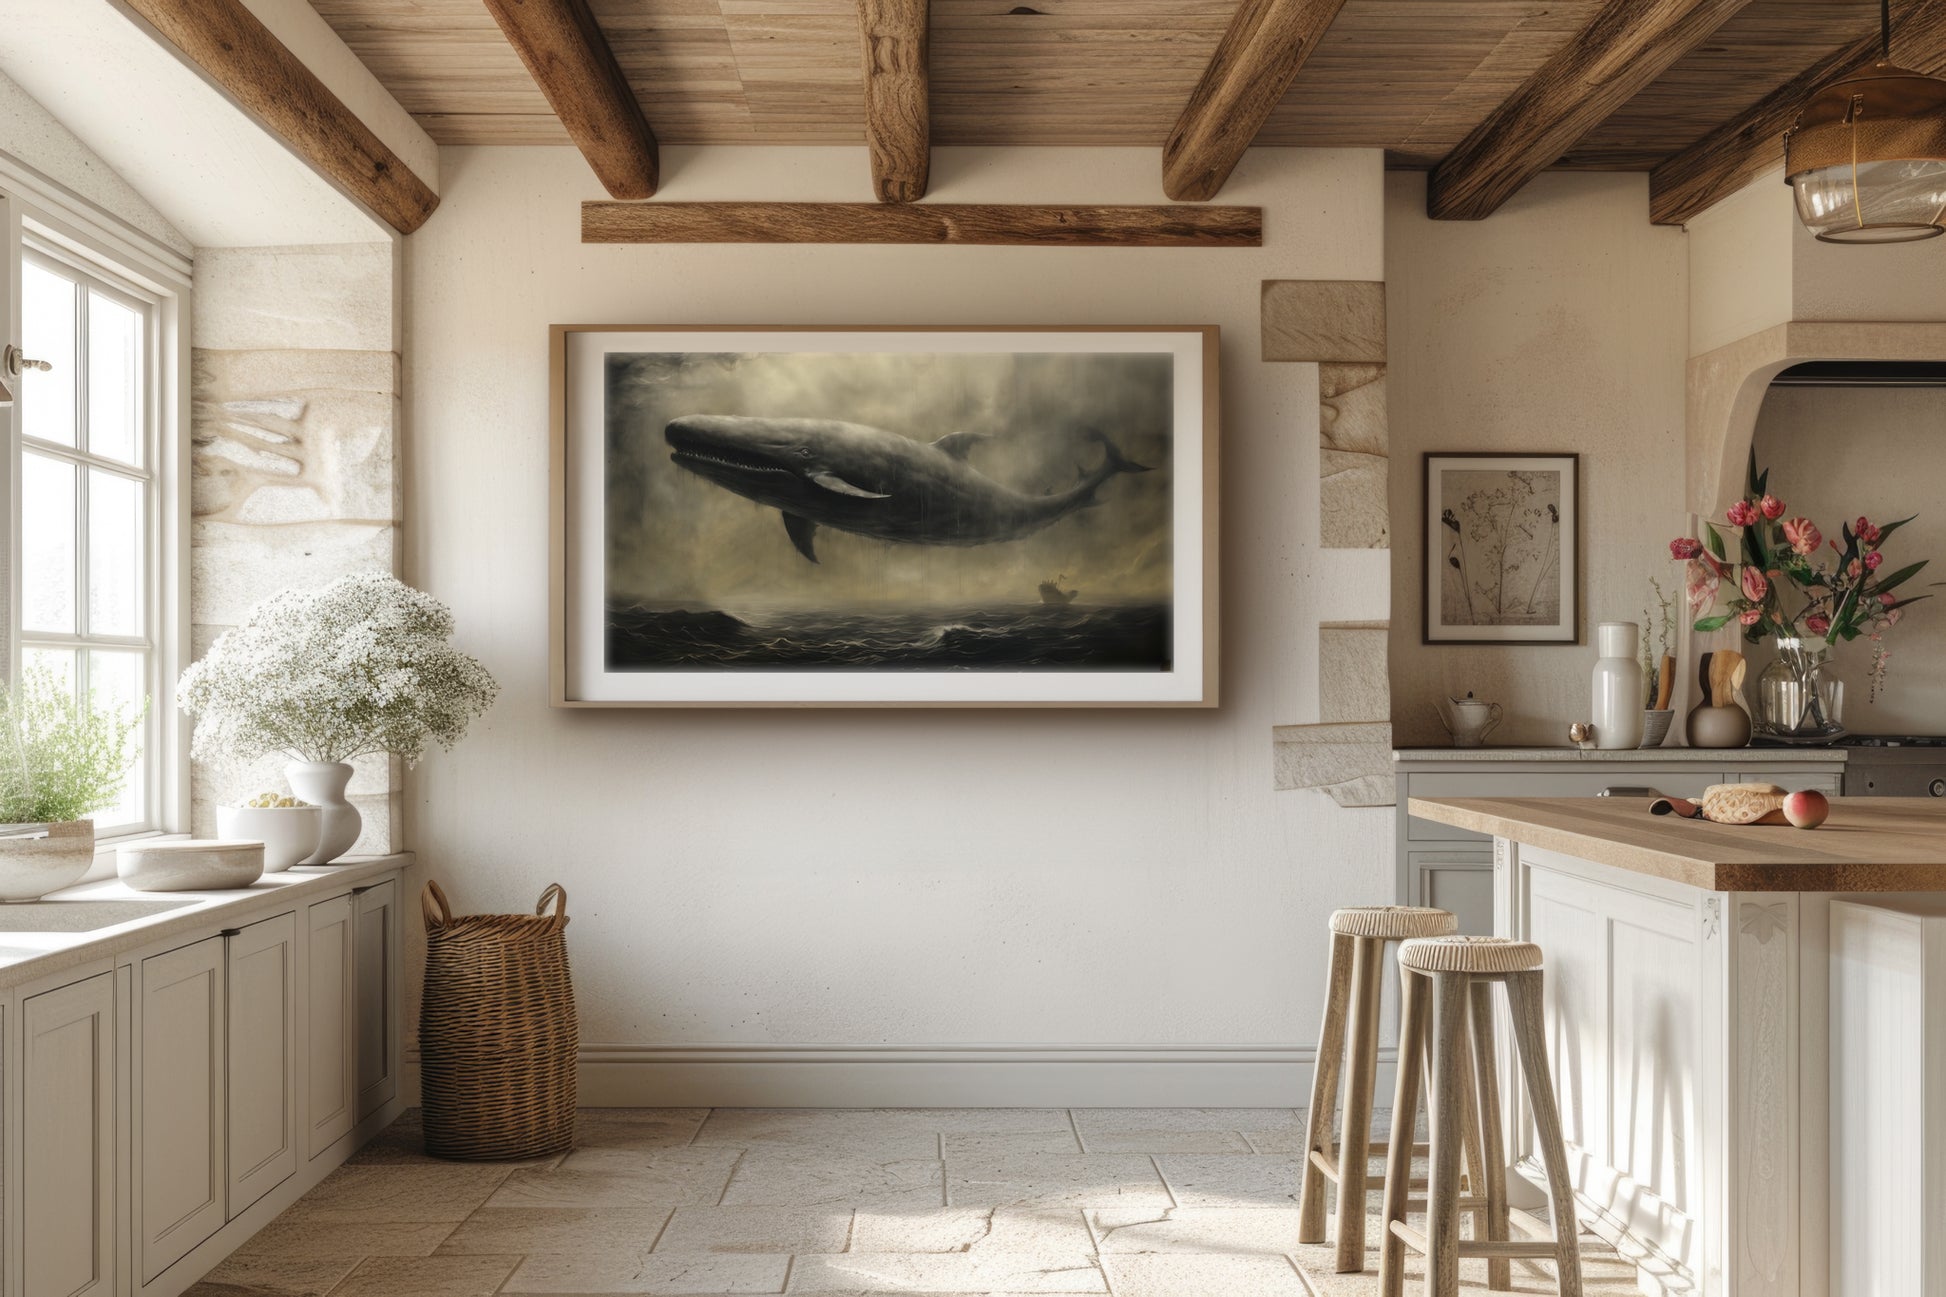 A beautifully detailed vintage-style artwork print showing a mythical whale flying above the ocean